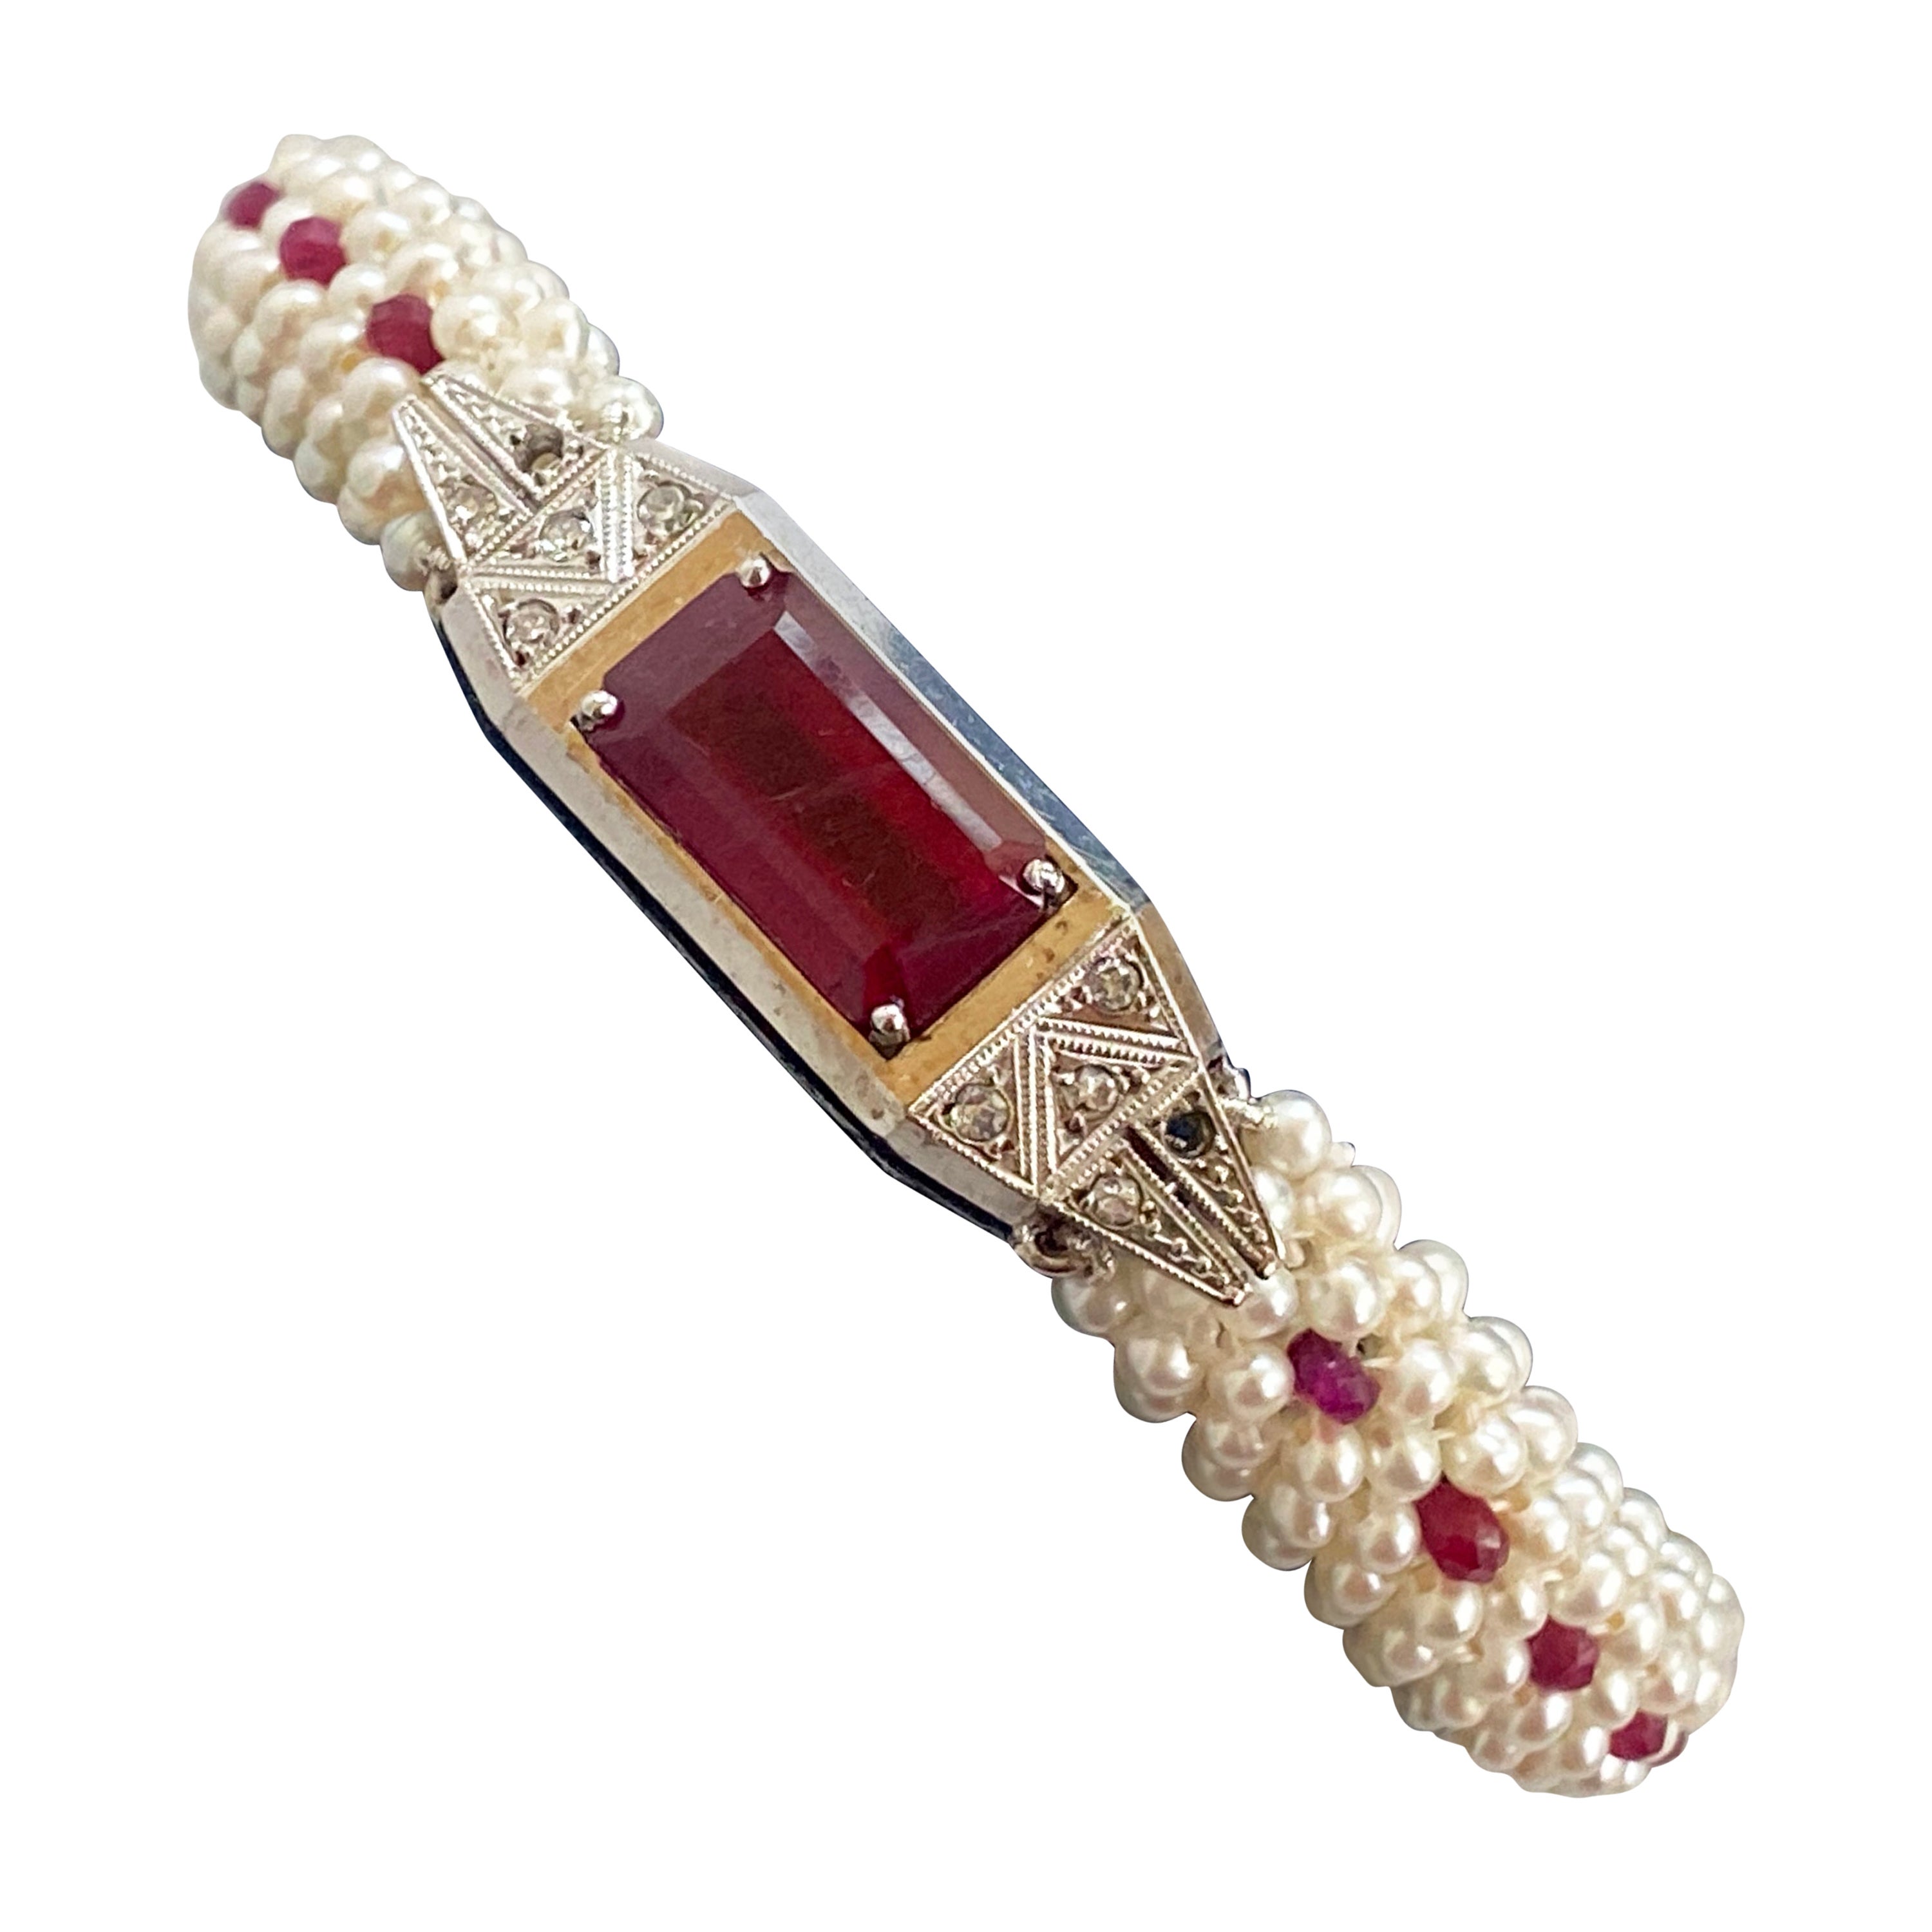 Gorgeous One of A Kind piece by Marina J. This bracelet features a lovely Antique solid 14k White Gold Diamond encrusted Watch, that has been repurposed into a stunning Ruby set centerpiece. The brilliant and bright red rectangular Ruby is adorned